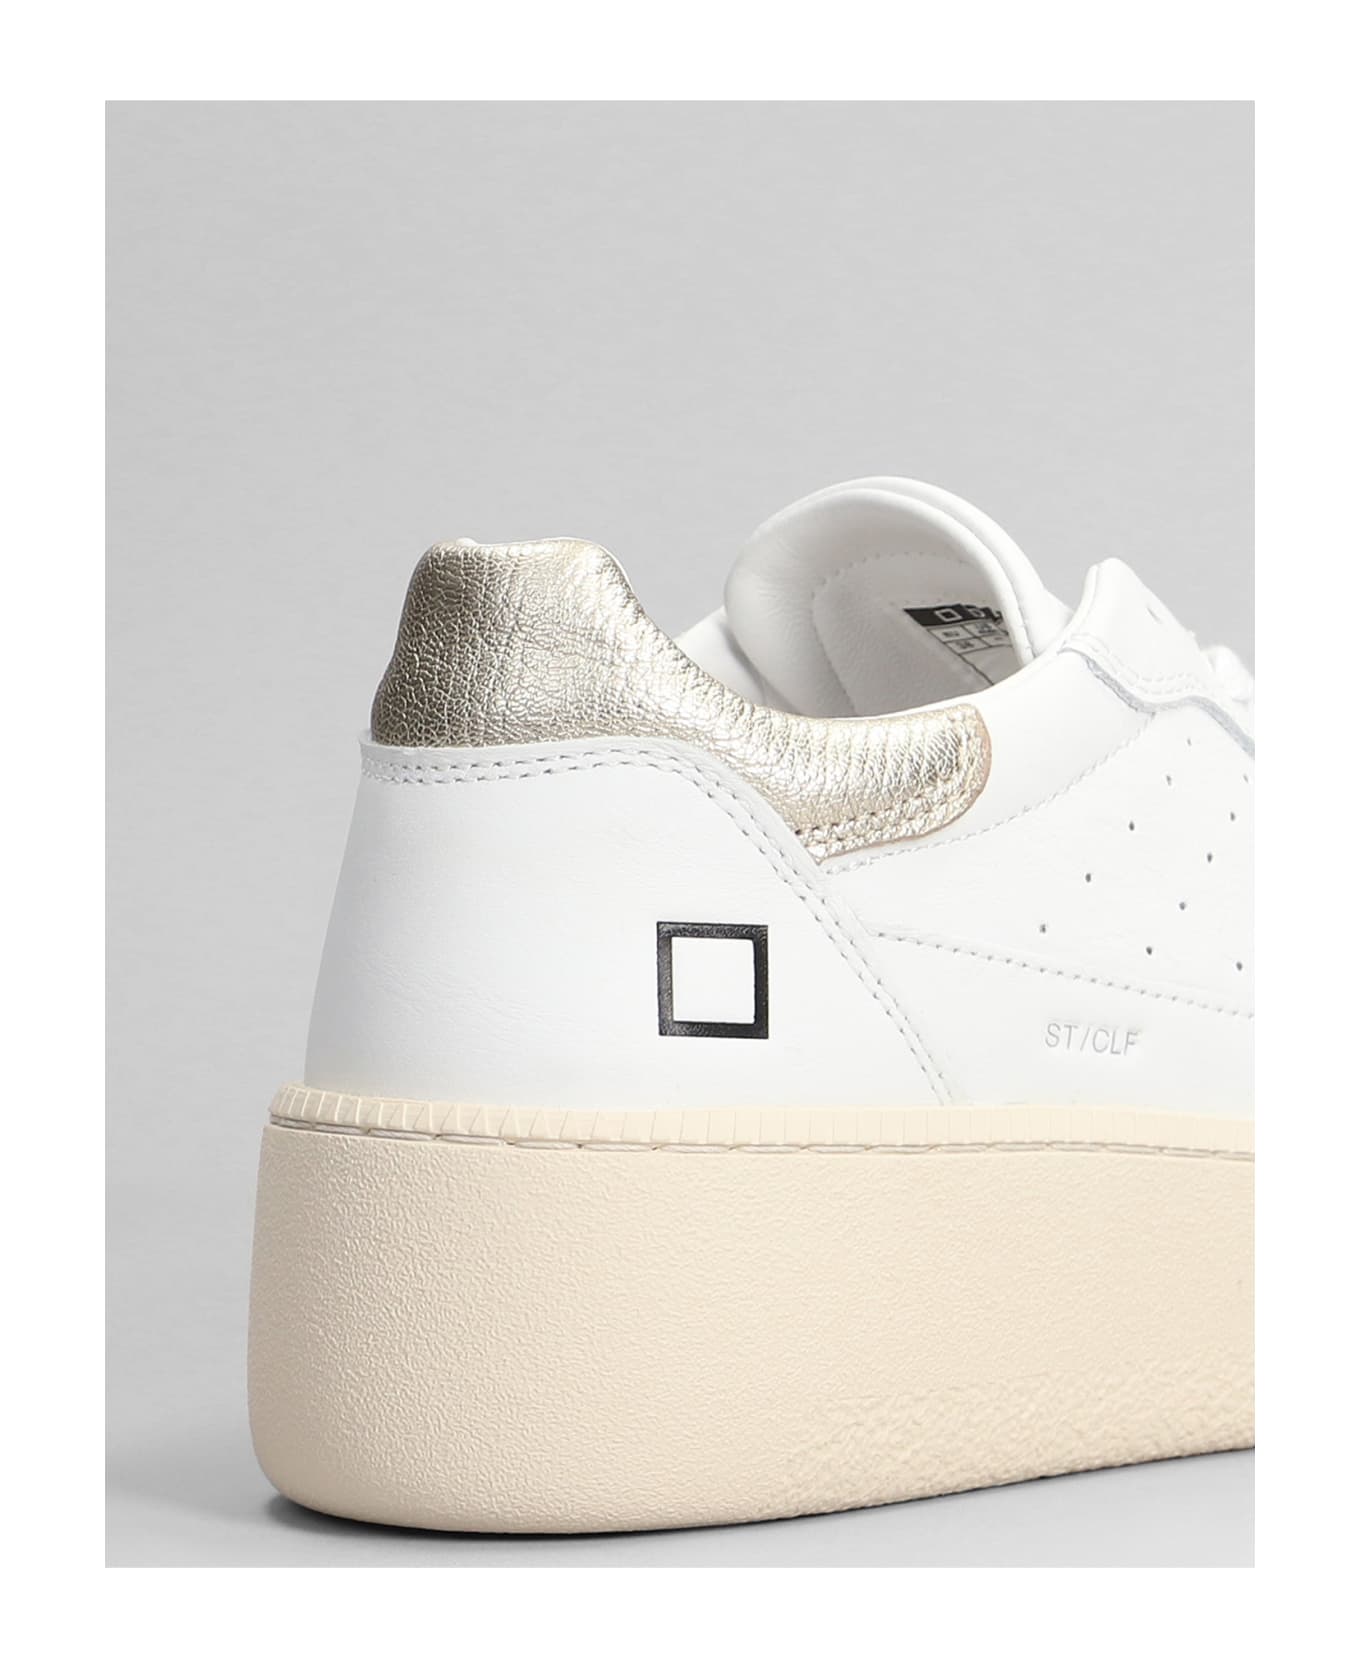 D.A.T.E. Step Sneakers In White Leather - Bianco/Platino ウェッジシューズ